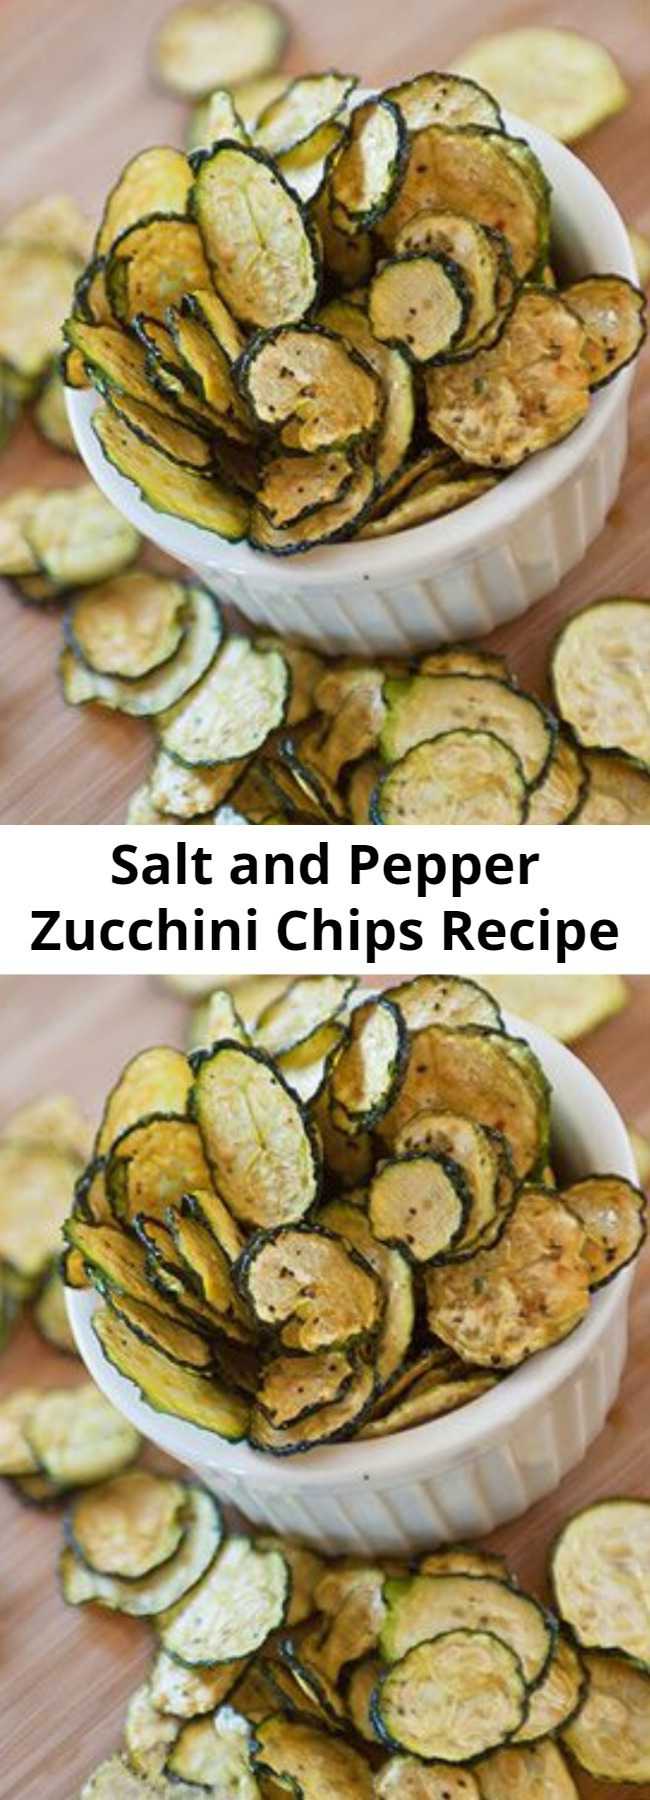 Salt and Pepper Zucchini Chips Recipe - This Dehydrated Zucchini Chips Recipe is SO good.  Full of flavors, slightly spicy. Amazing.